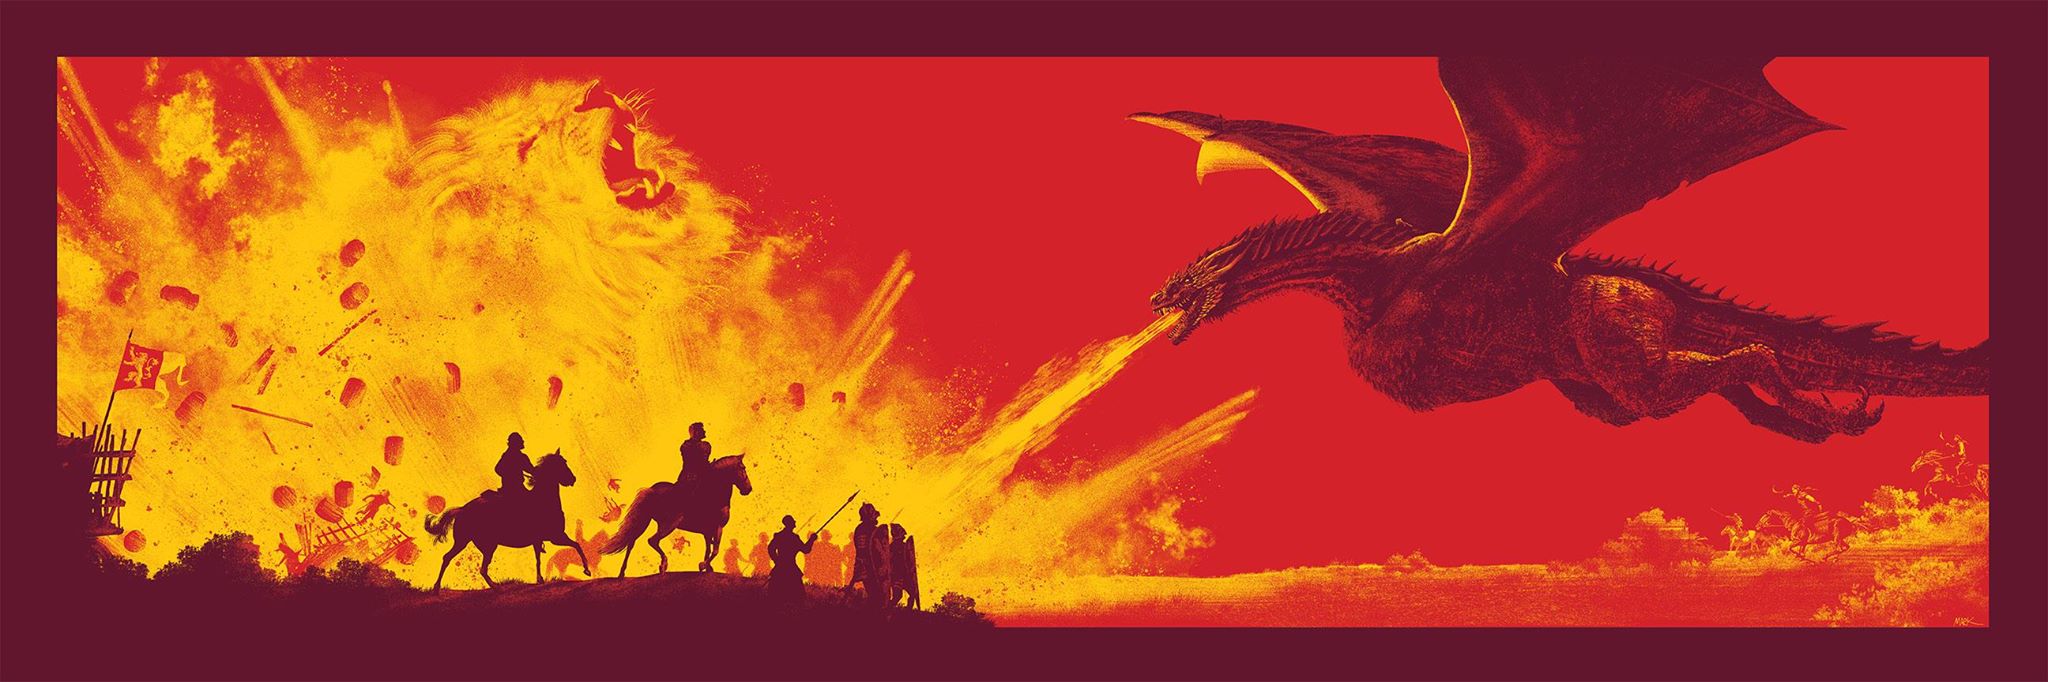 The Best Scene Of Game Of Thrones Season Seven Comes To Life In This Insane Poster